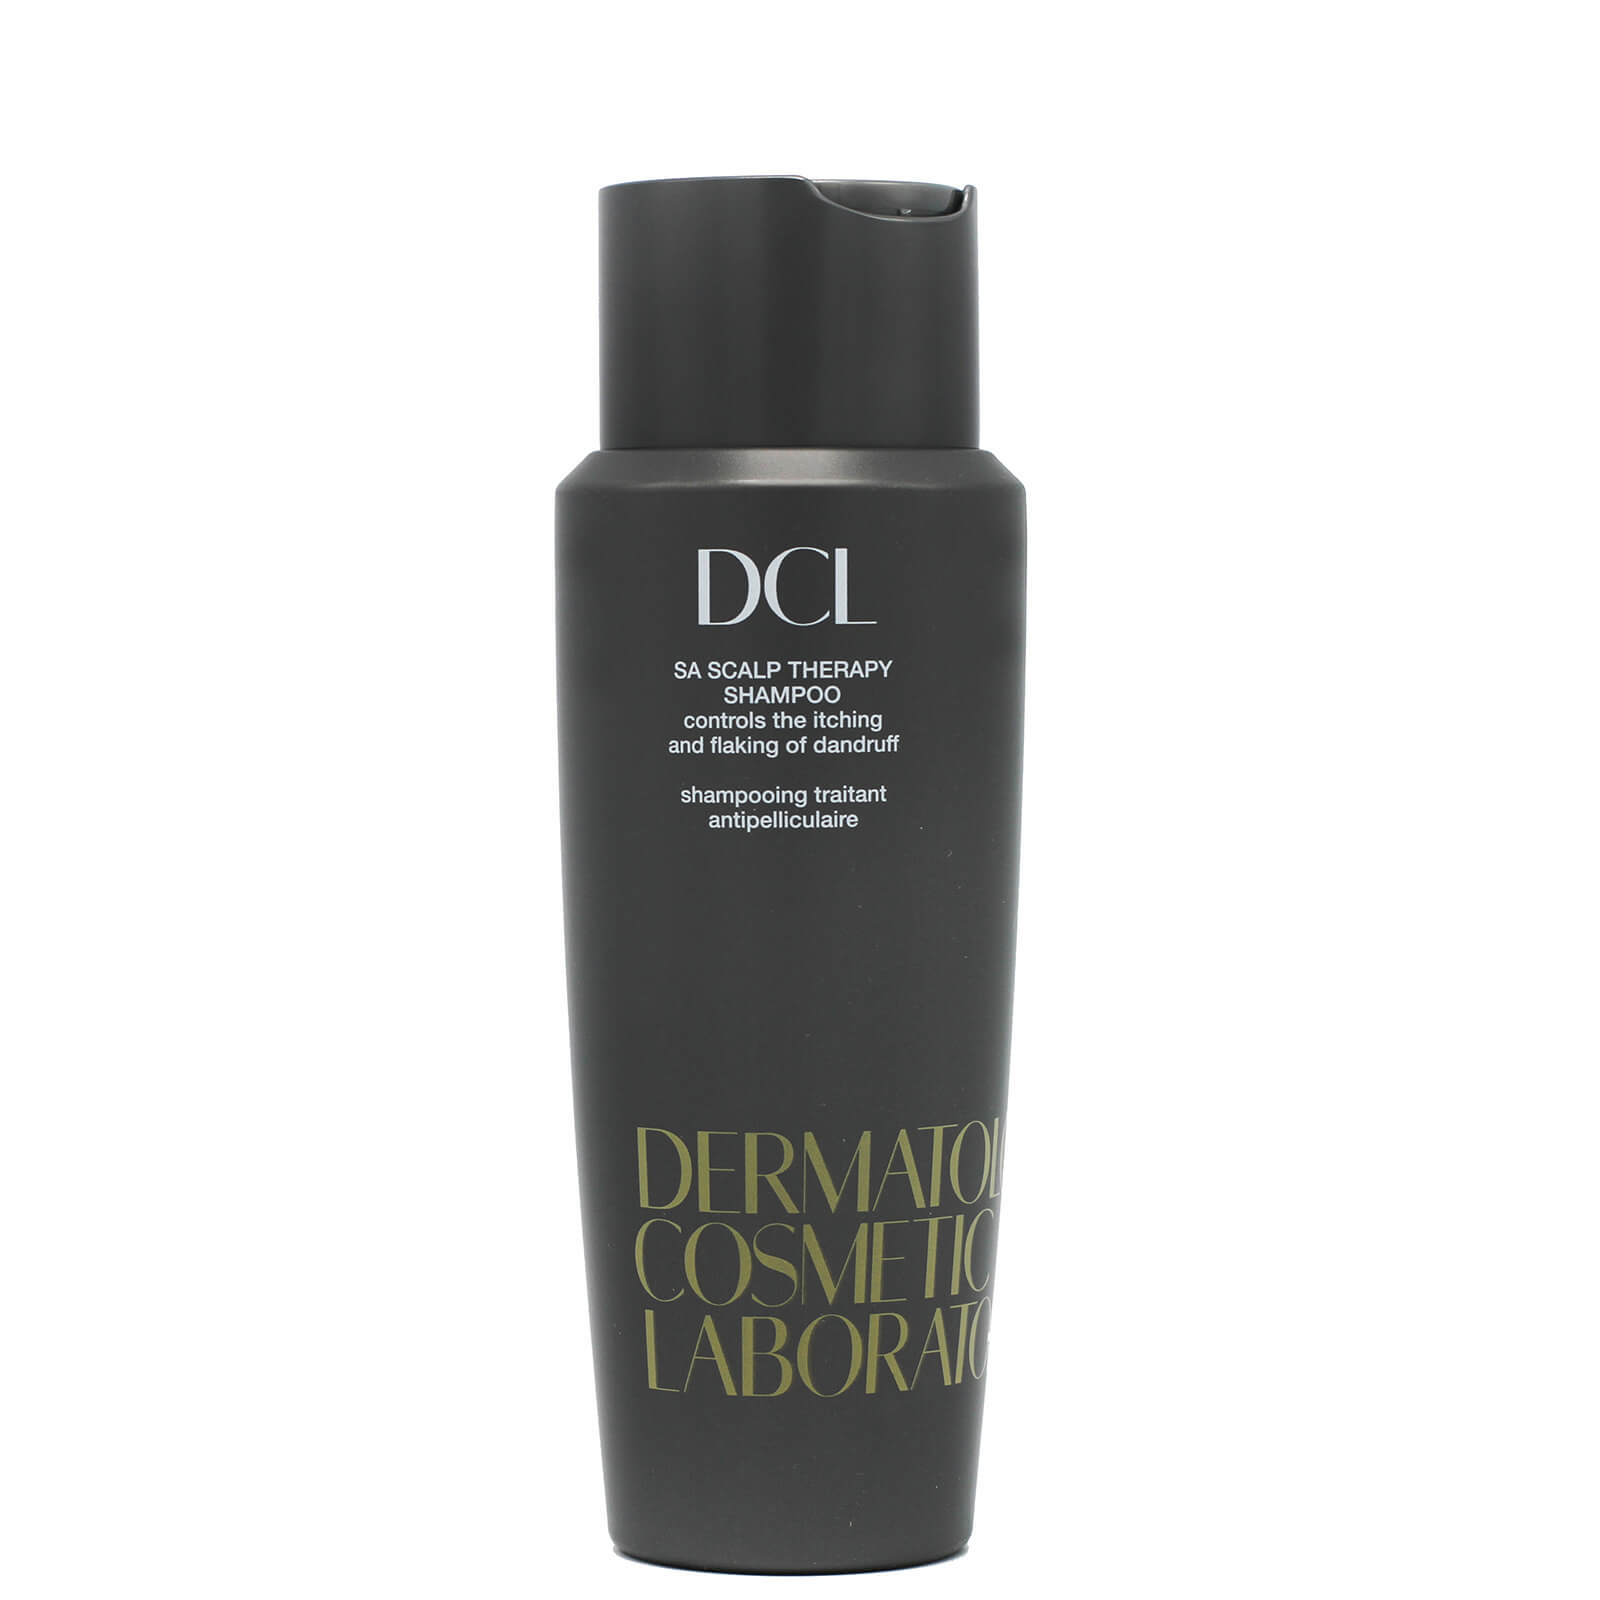 DCL Skincare SA Scalp Therapy Itching and Flaking Shampoo 300ml von DCL Dermatologic Cosmetic Laboratories